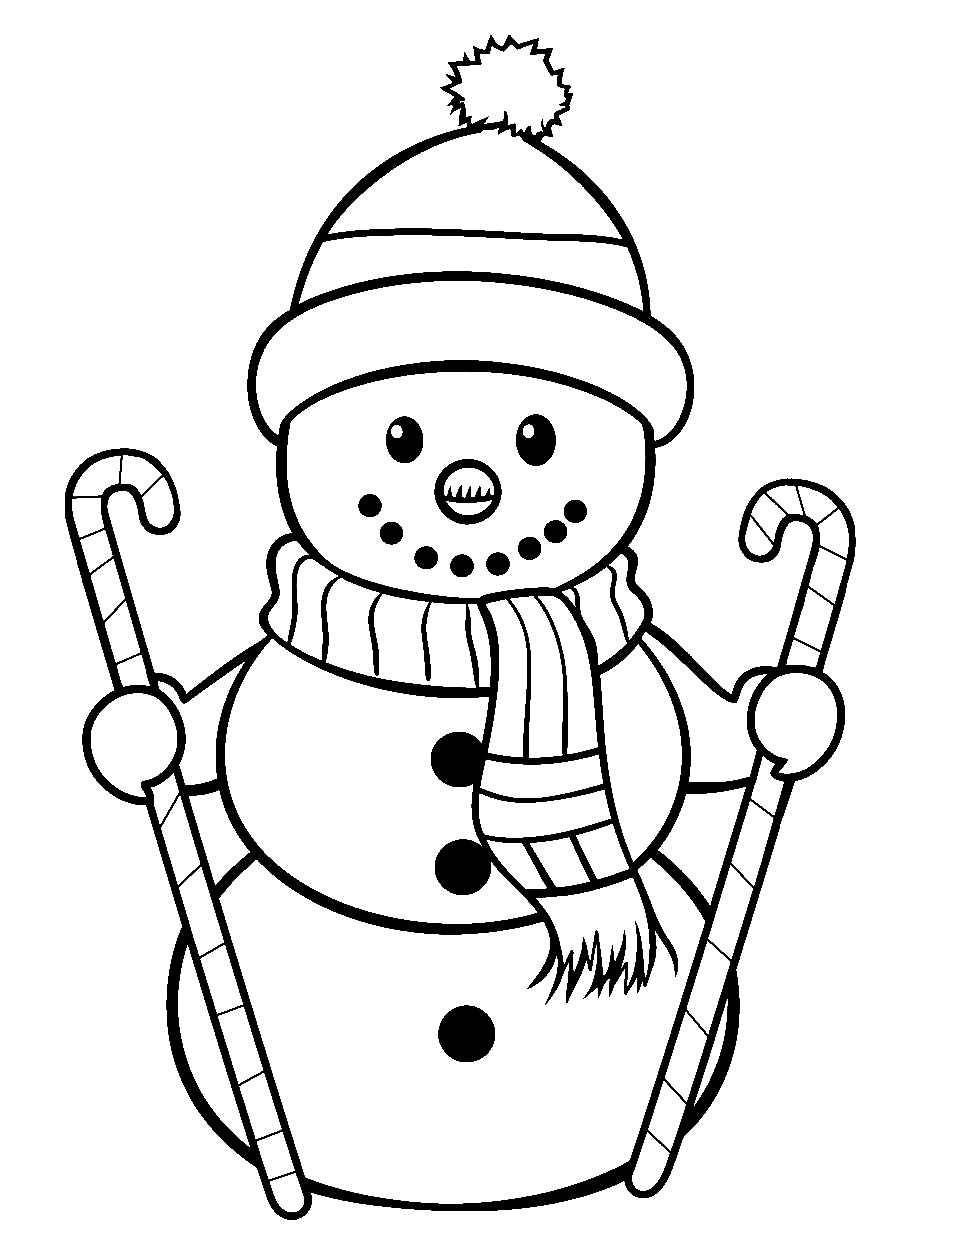 Merry Snowman with Candy Canes Coloring Page - A happy snowman holding candy canes in each hand.